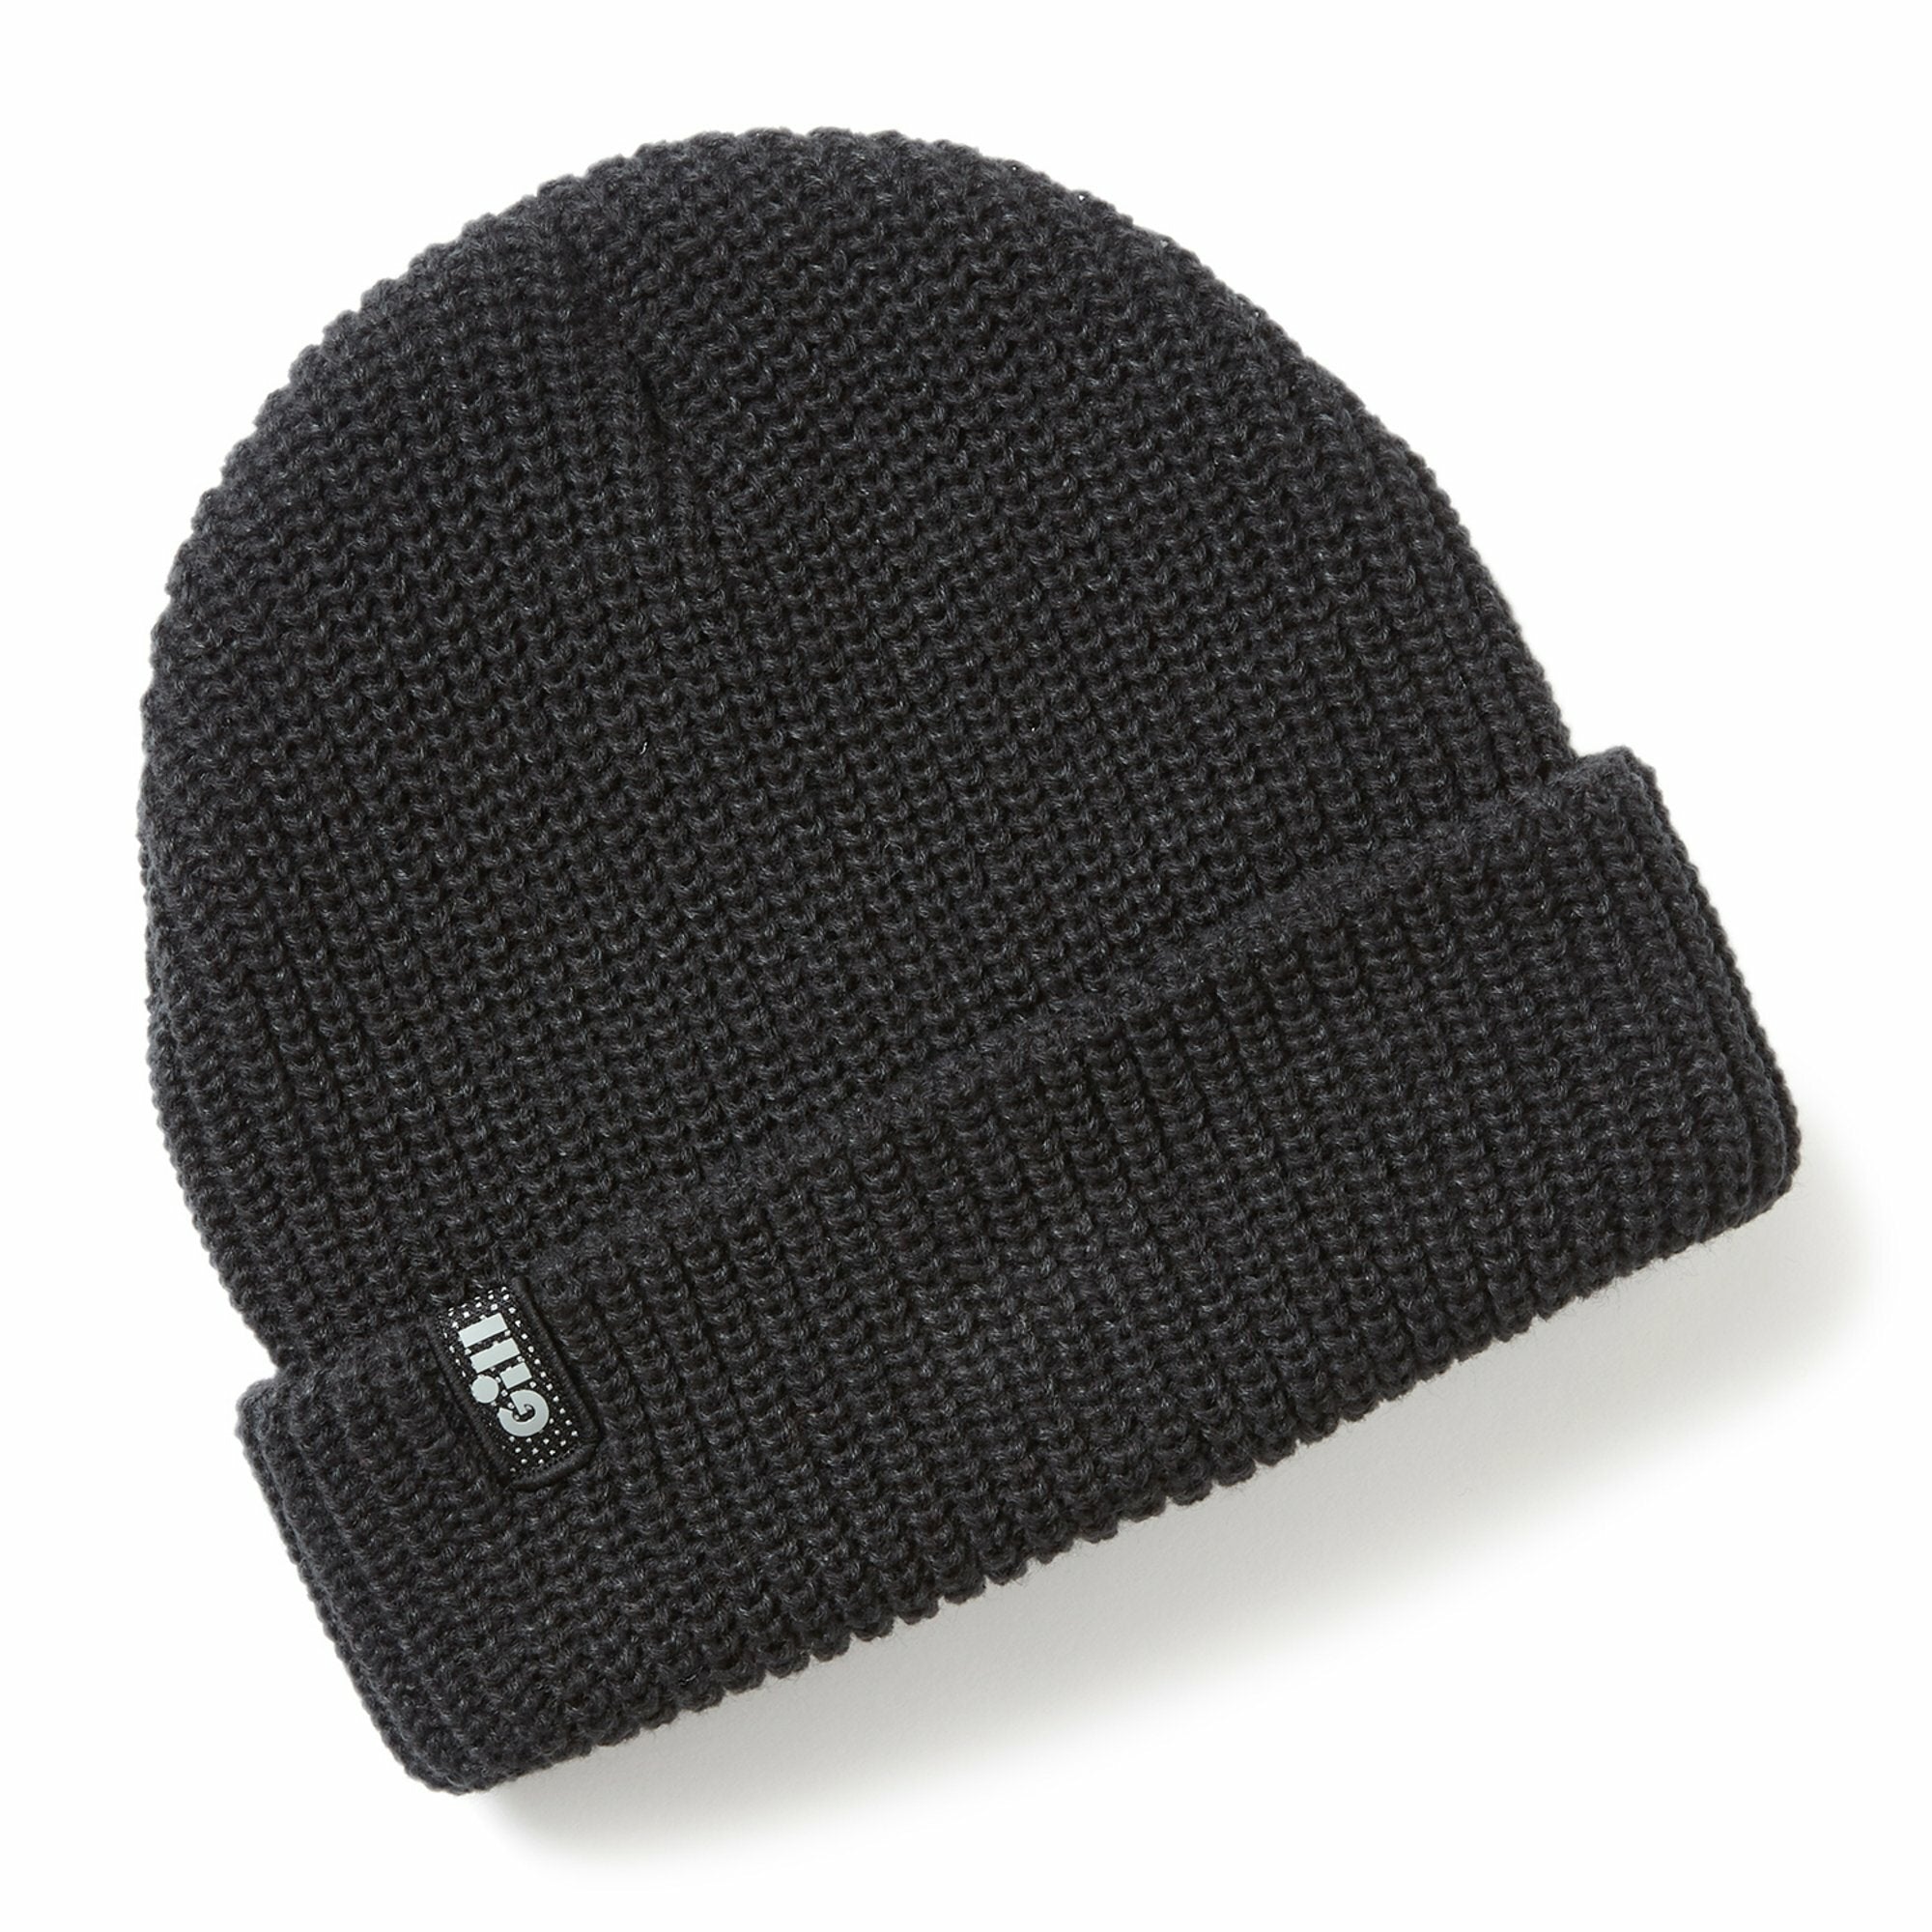 Floating Knit Beanie Hat